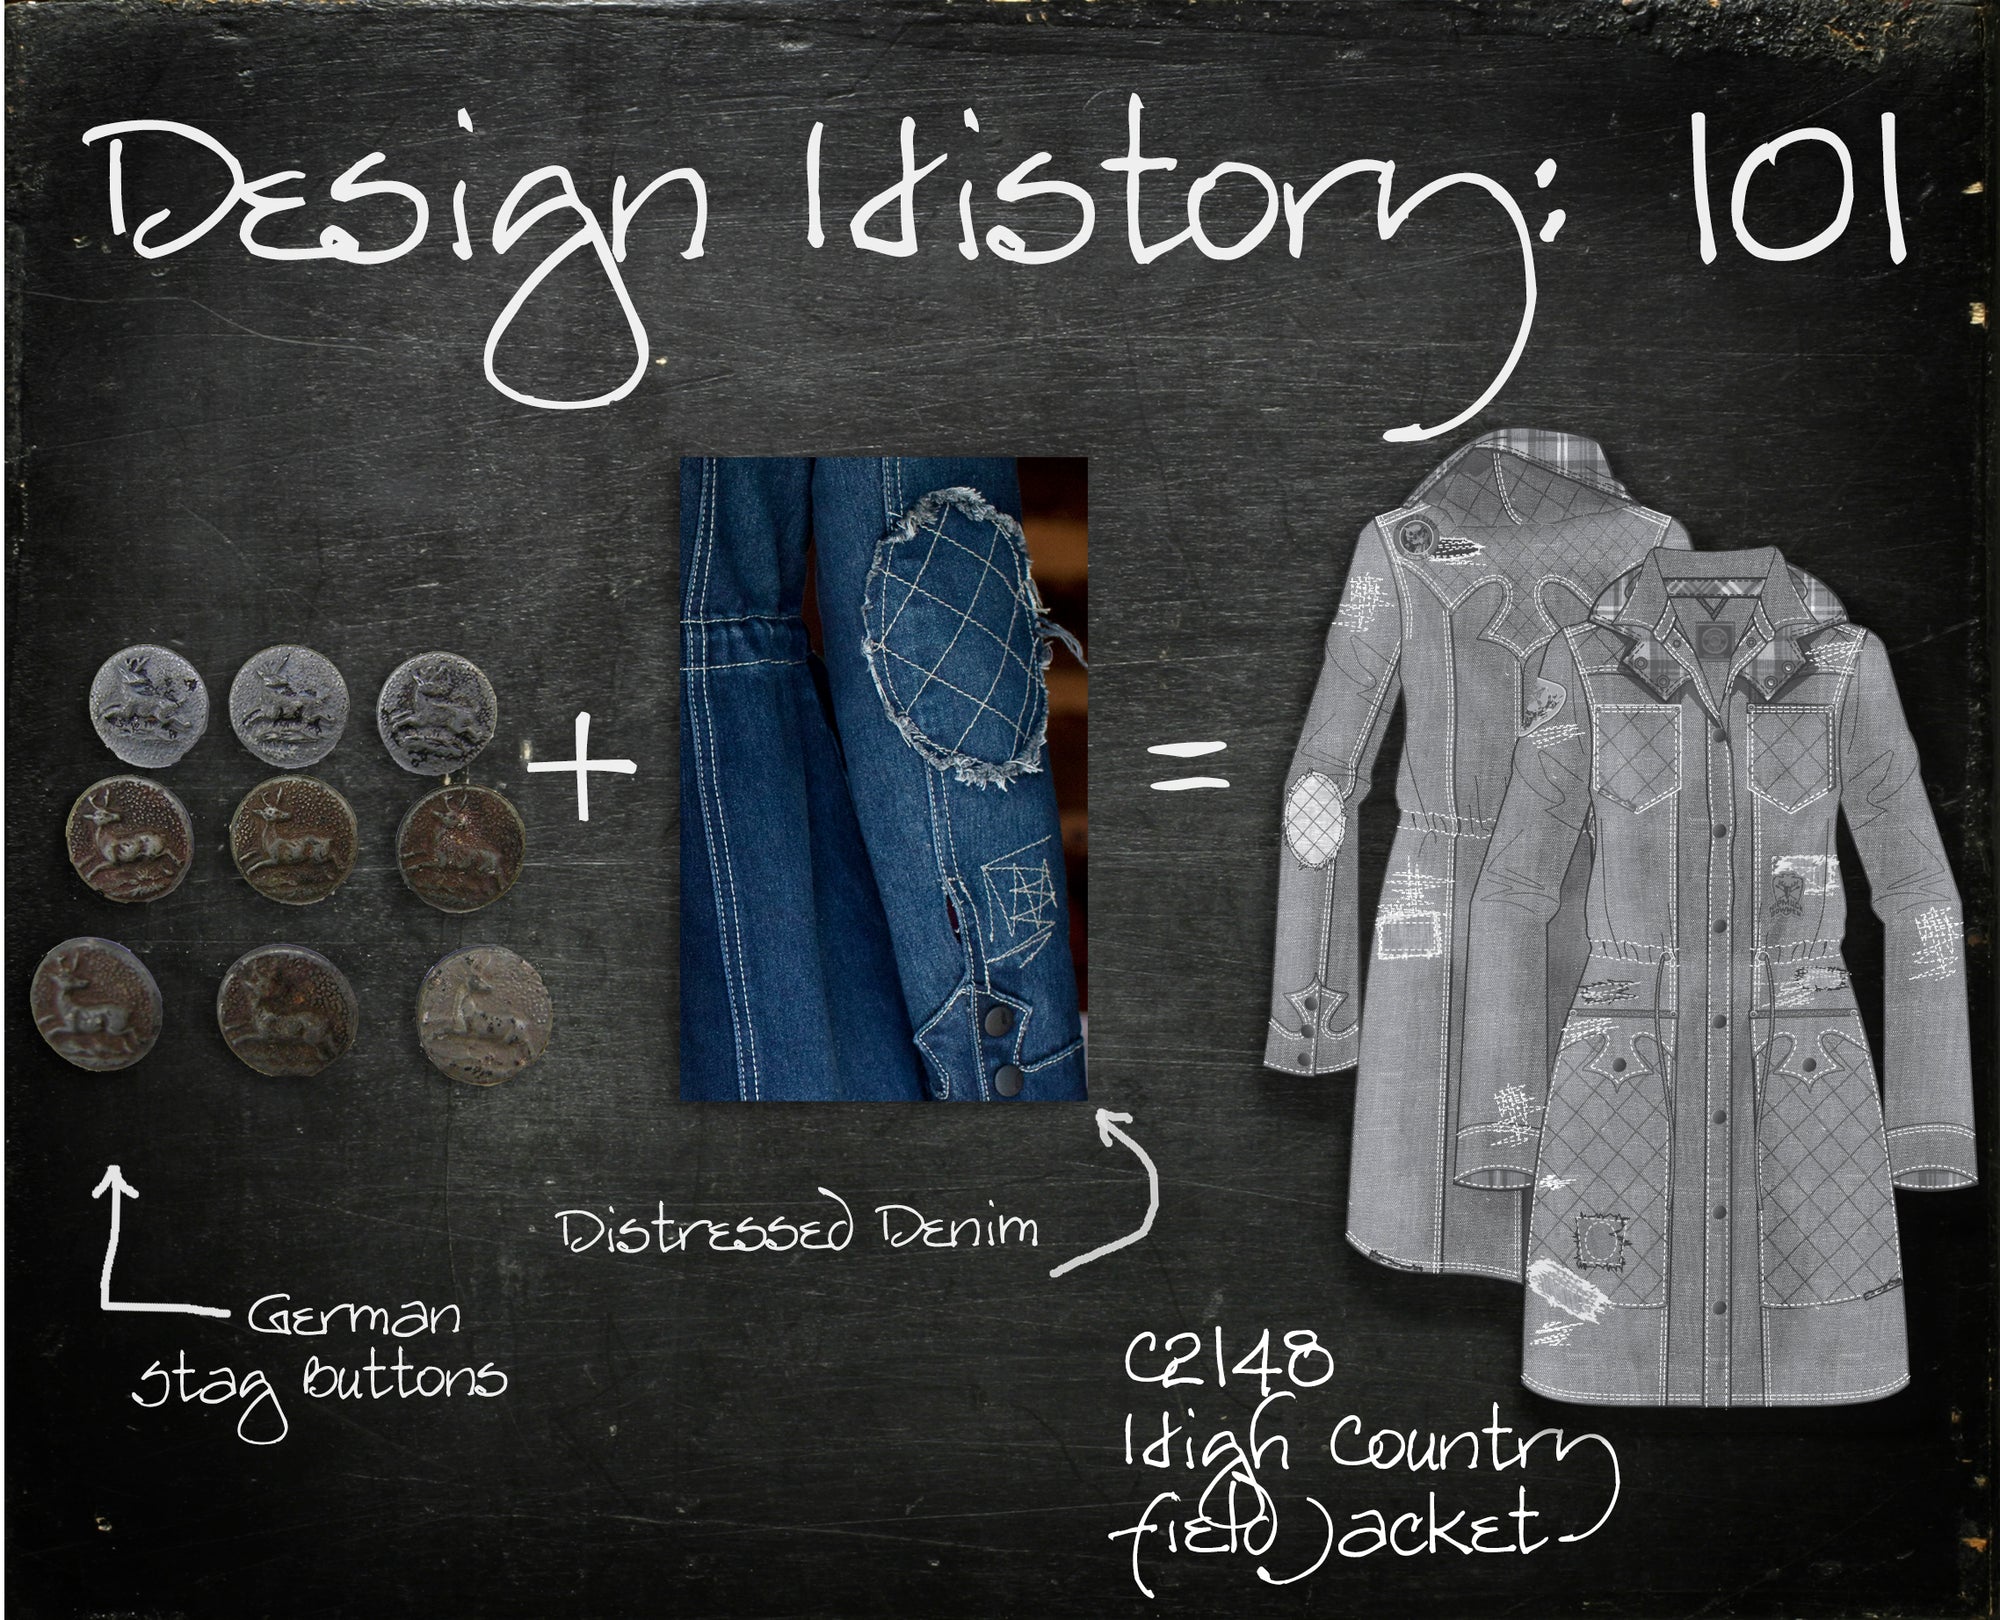 Design History 101: High Country Field Jacket